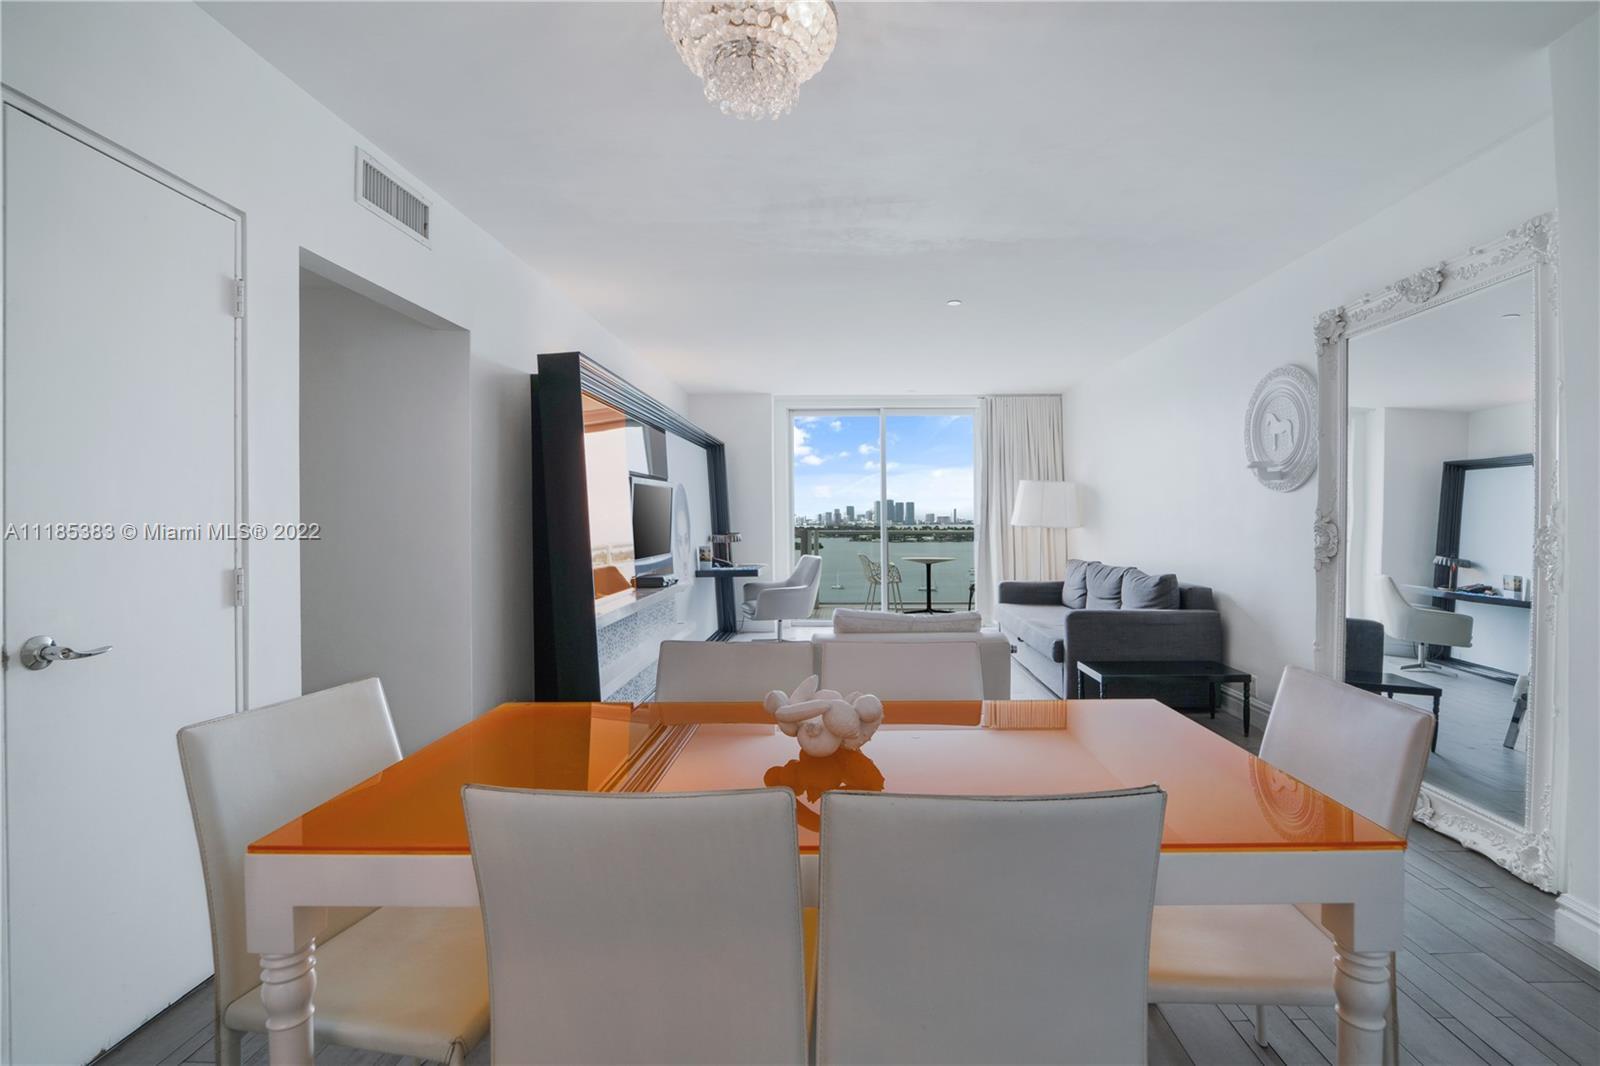 Priced to sell. Spectacular 2Bed/2Bath residence at the newly renovated Mondrian Hotel in South Beac